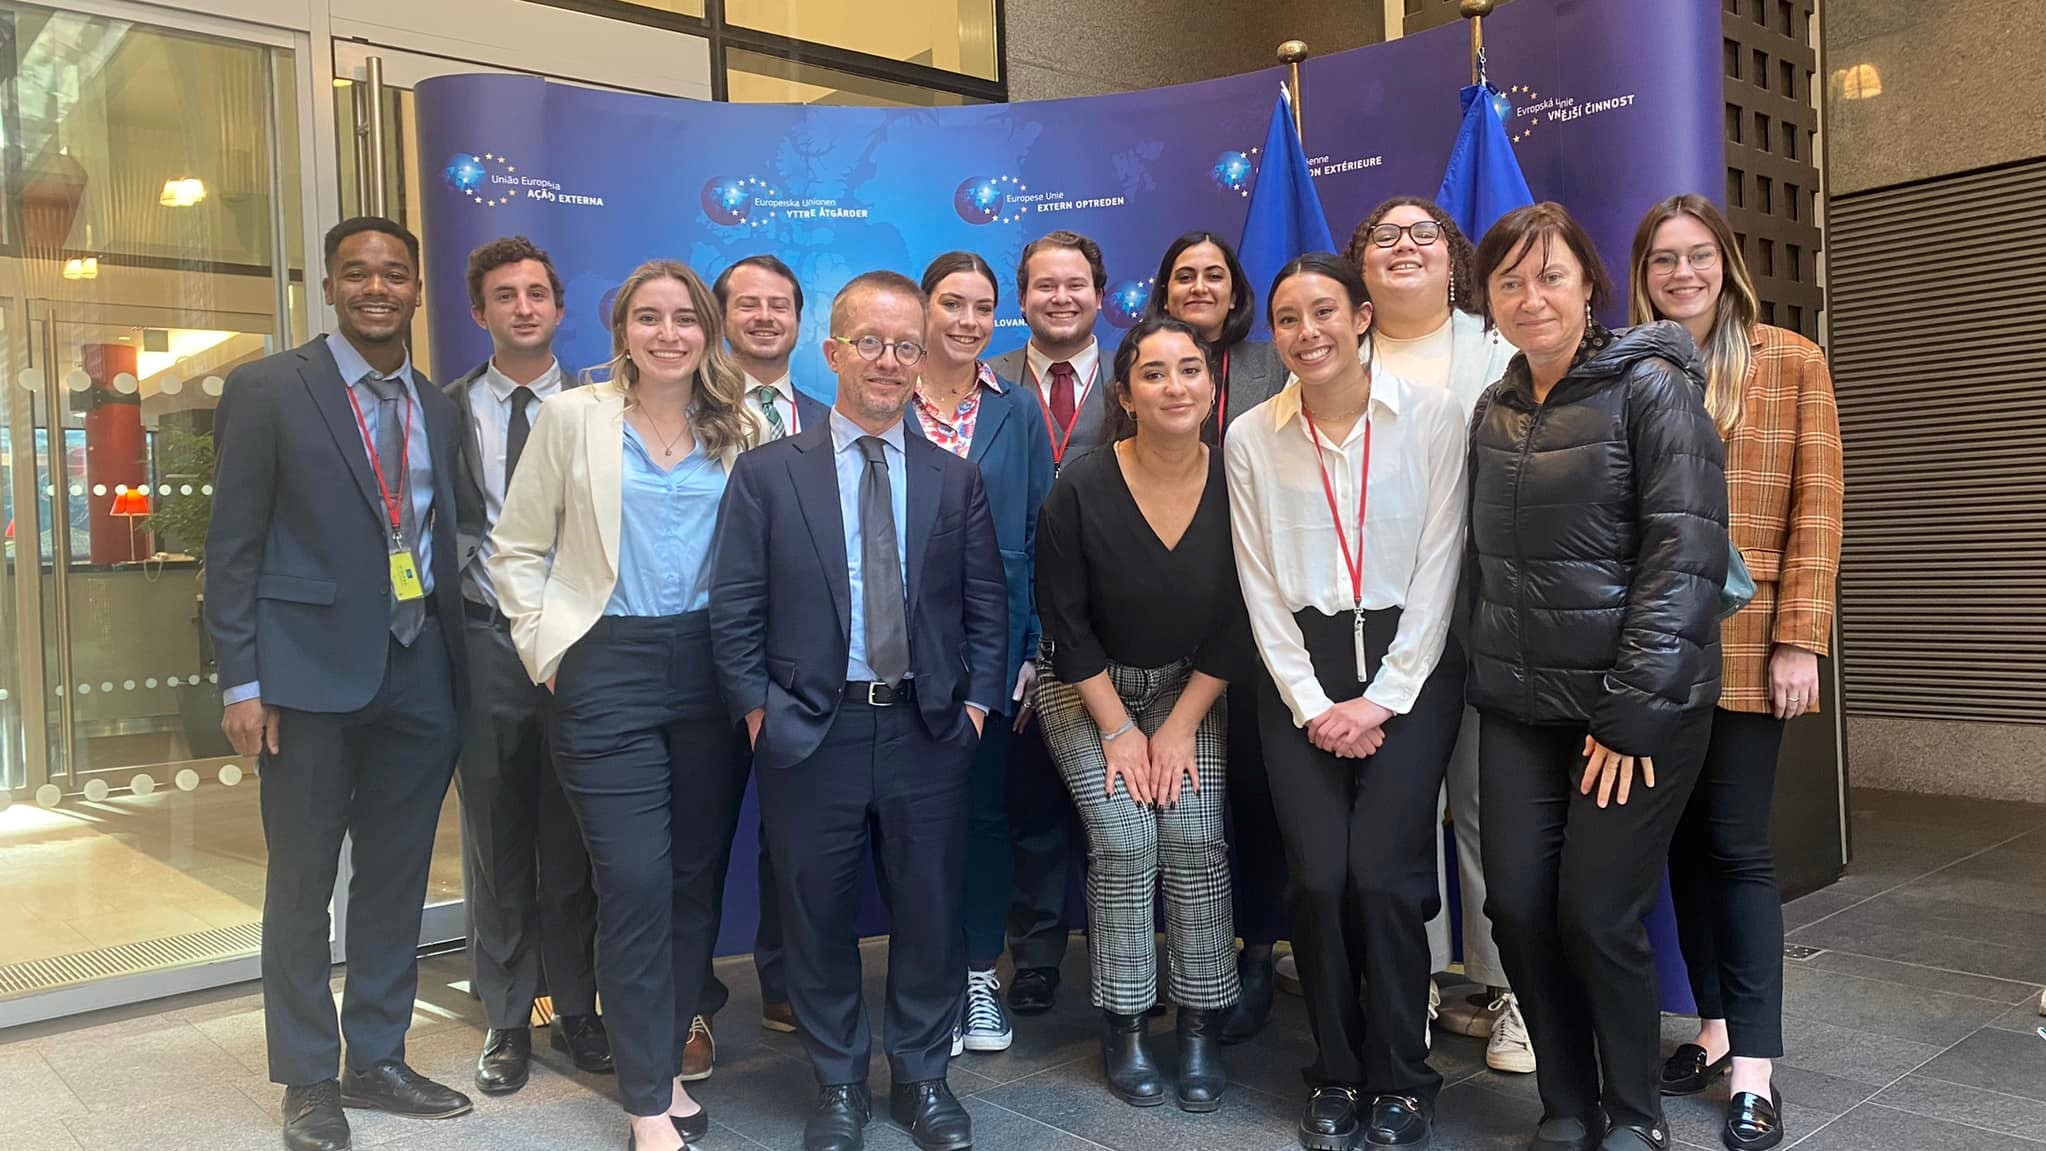 The class of 2022 studies European institutions in Brussels in March 2022 during the NATO summit.